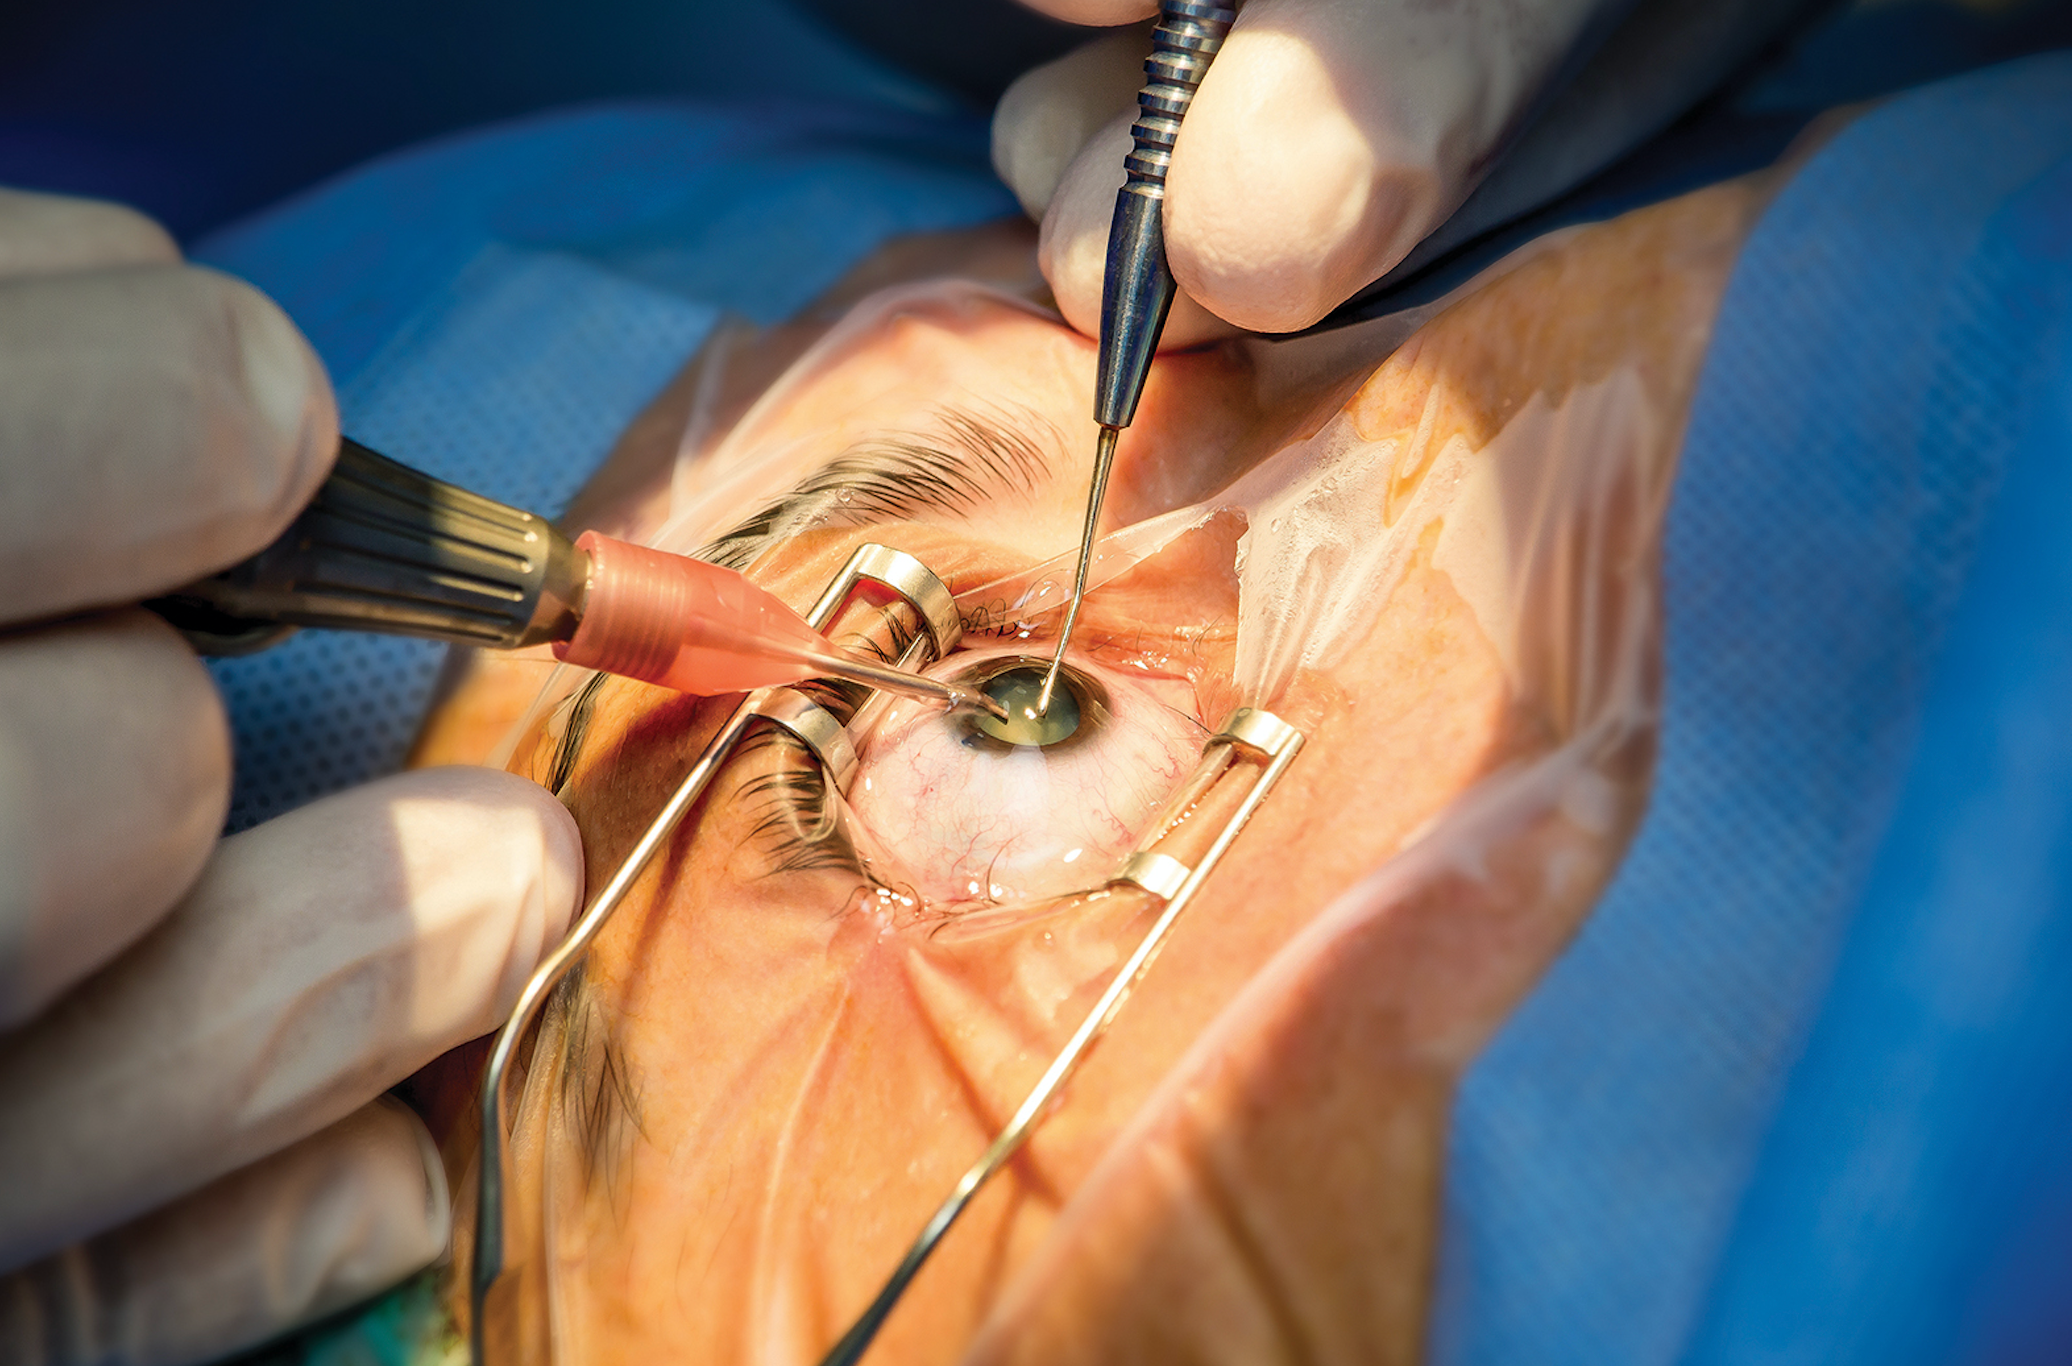 Vision implant surgery